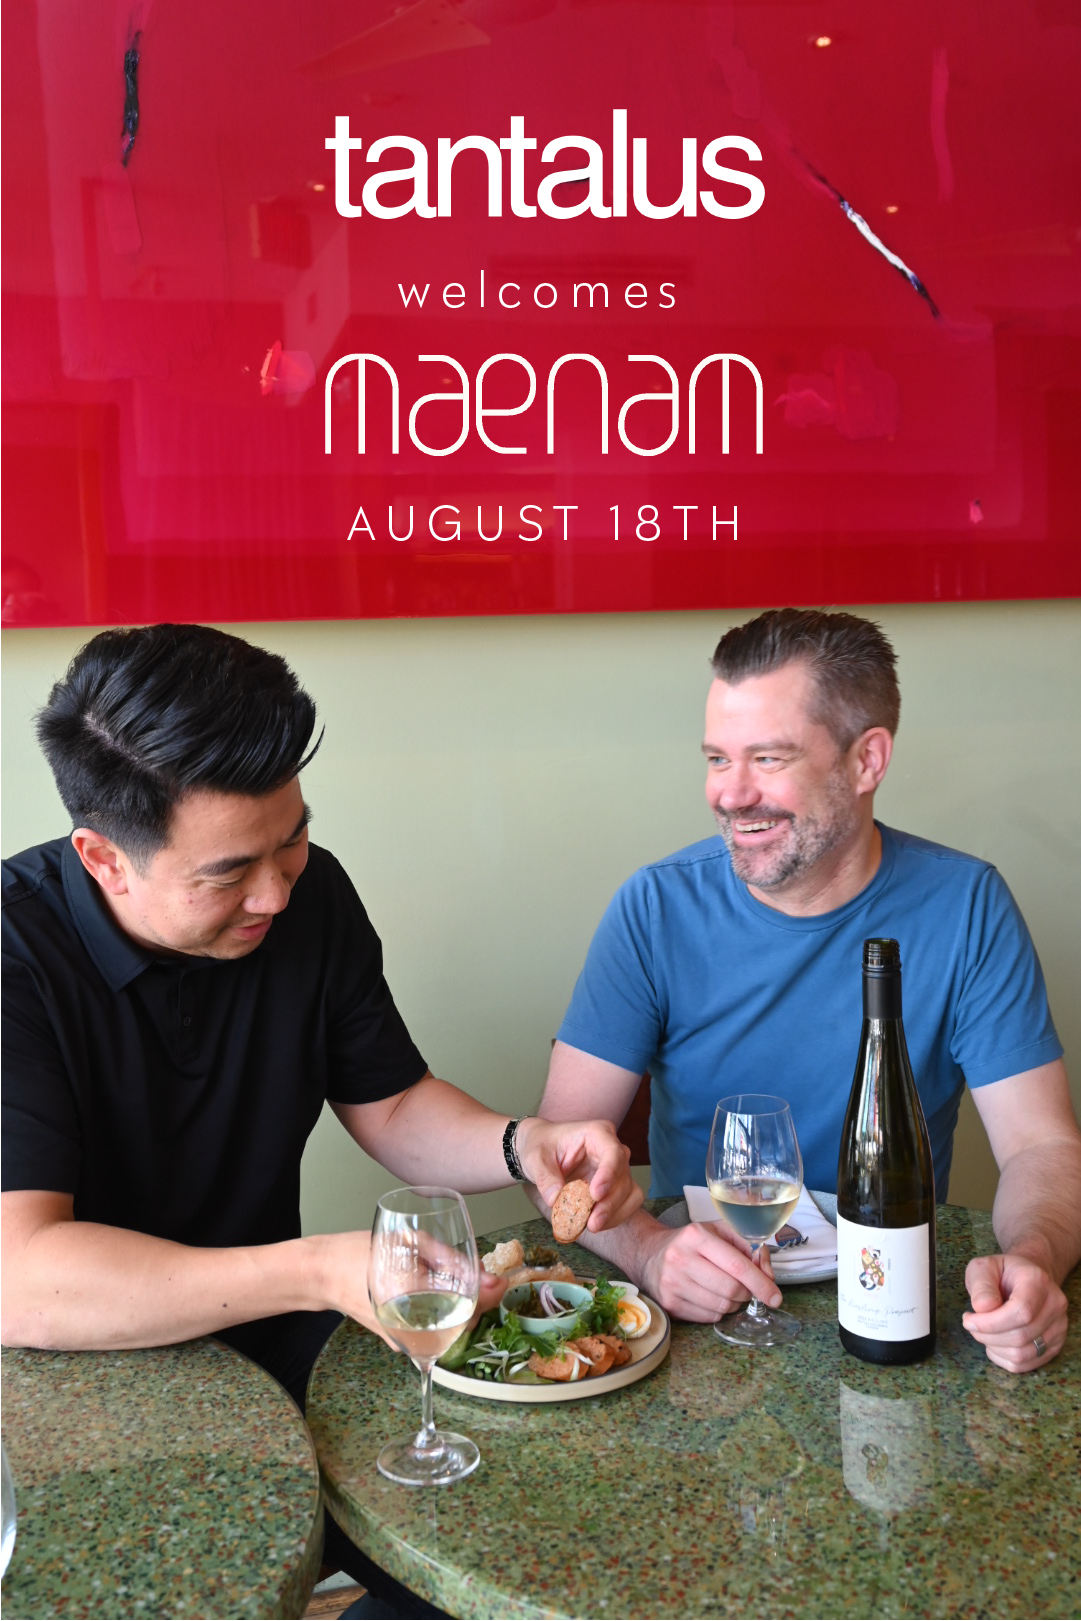 Tantalus Welcomes Maenam - August 18th